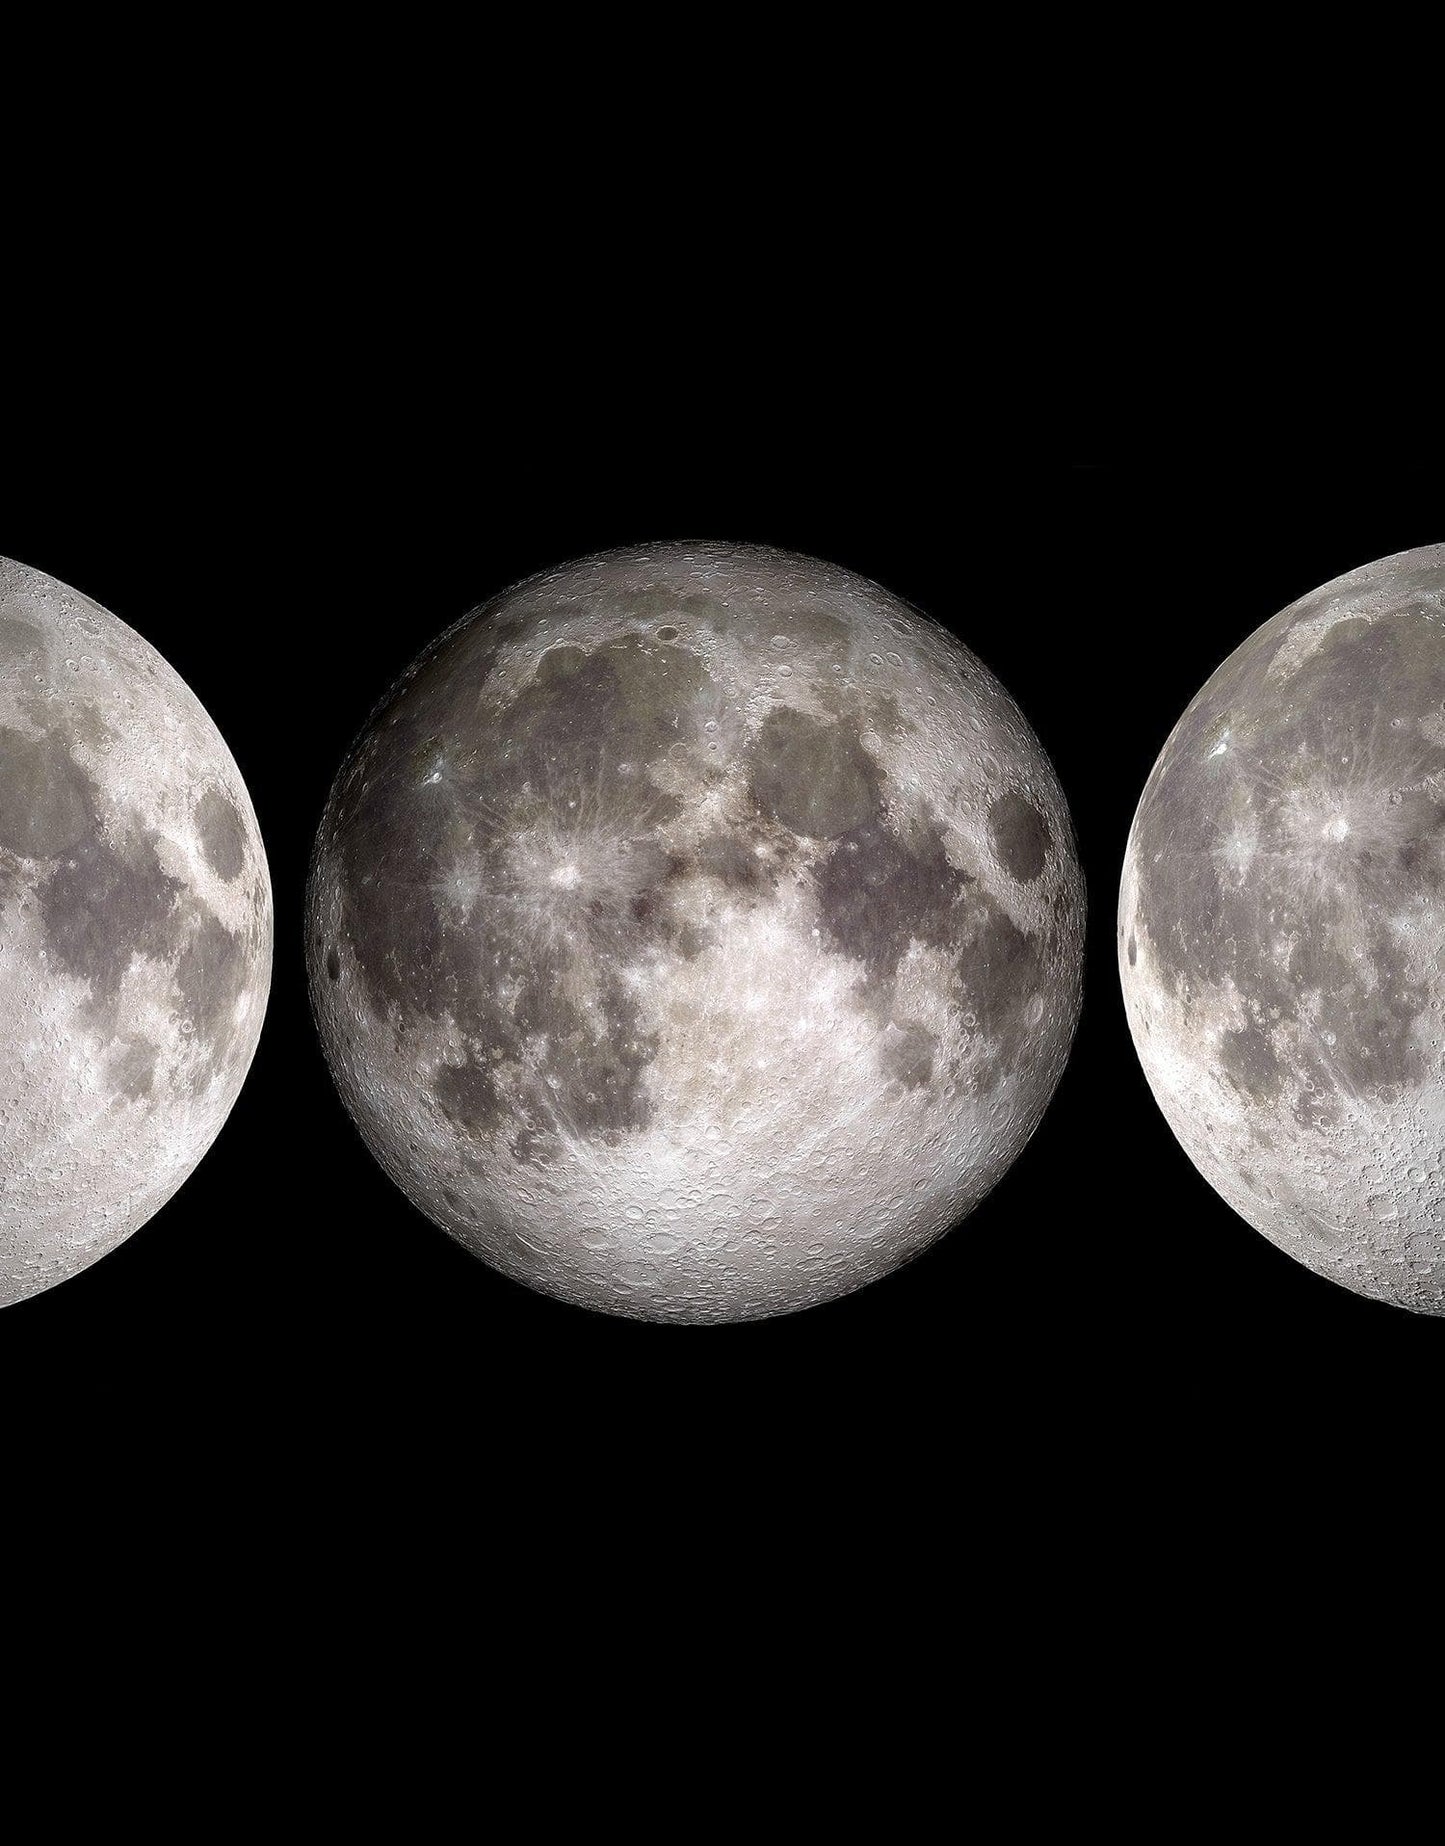 Views of our Moon’s Phases in the night sky Glossy Photo Print #P1021